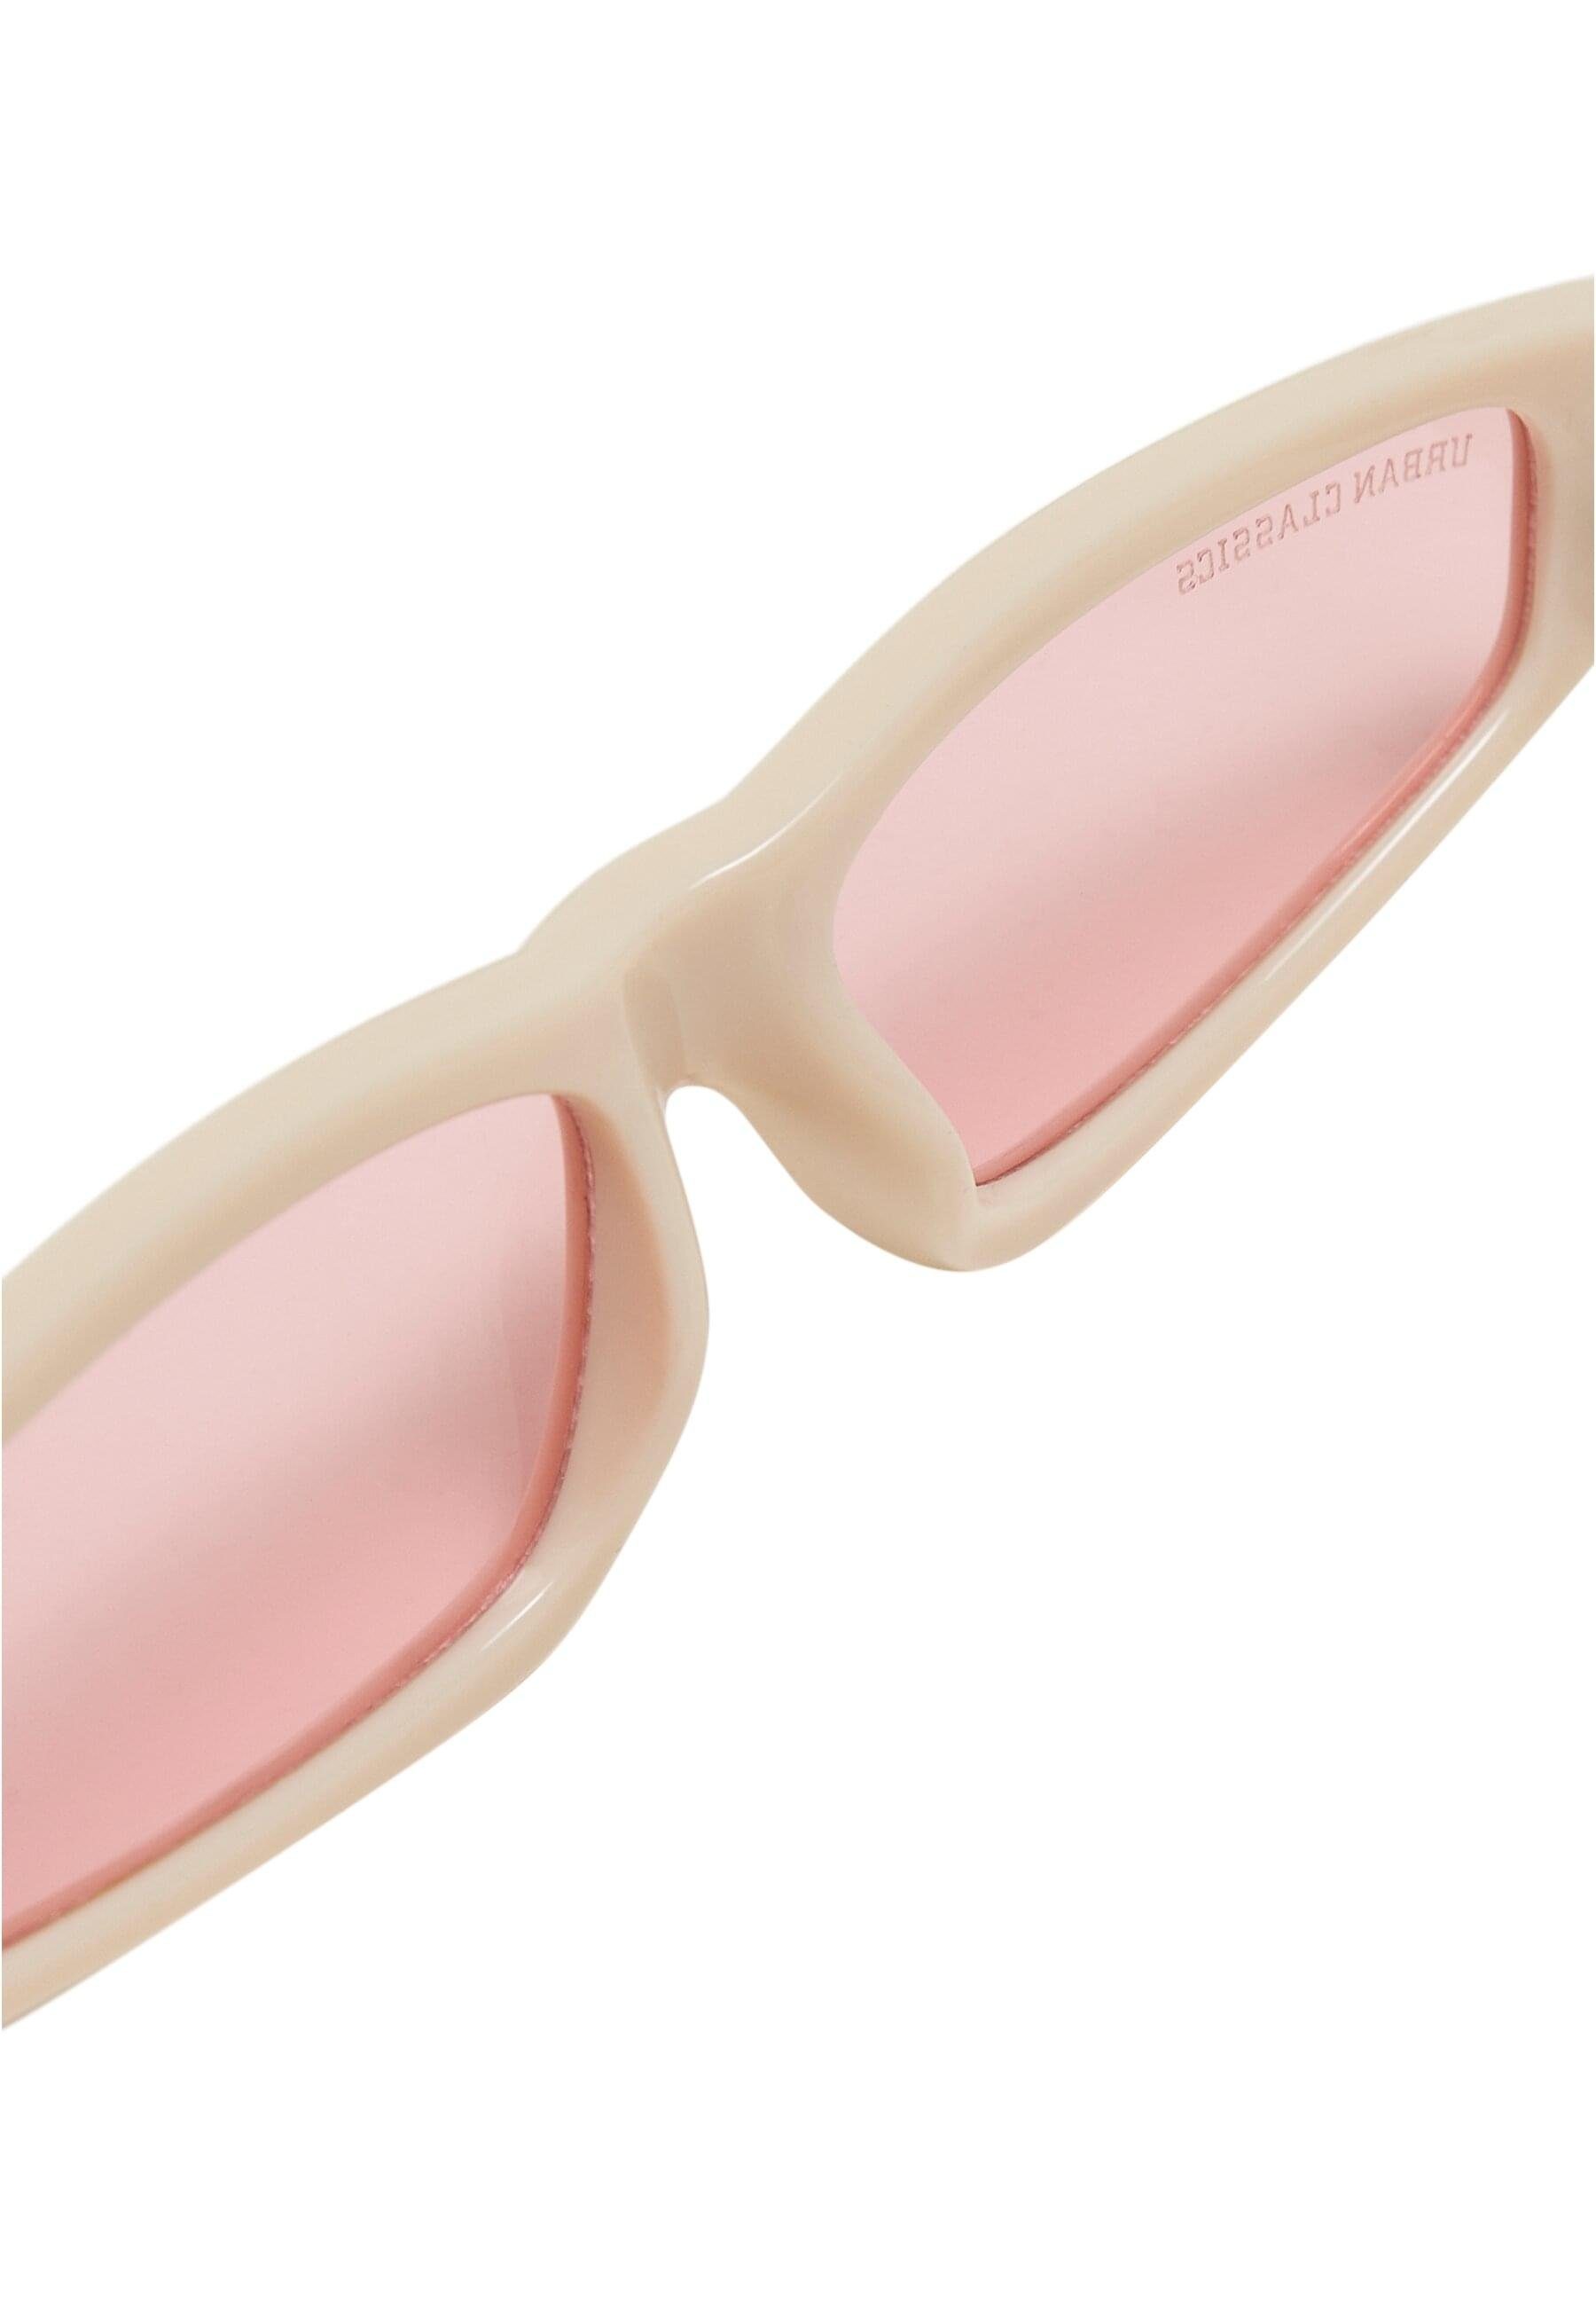 Unisex Lefkada CLASSICS Sonnenbrille Sunglasses URBAN brown/brown+offwhite/pink 2-Pack